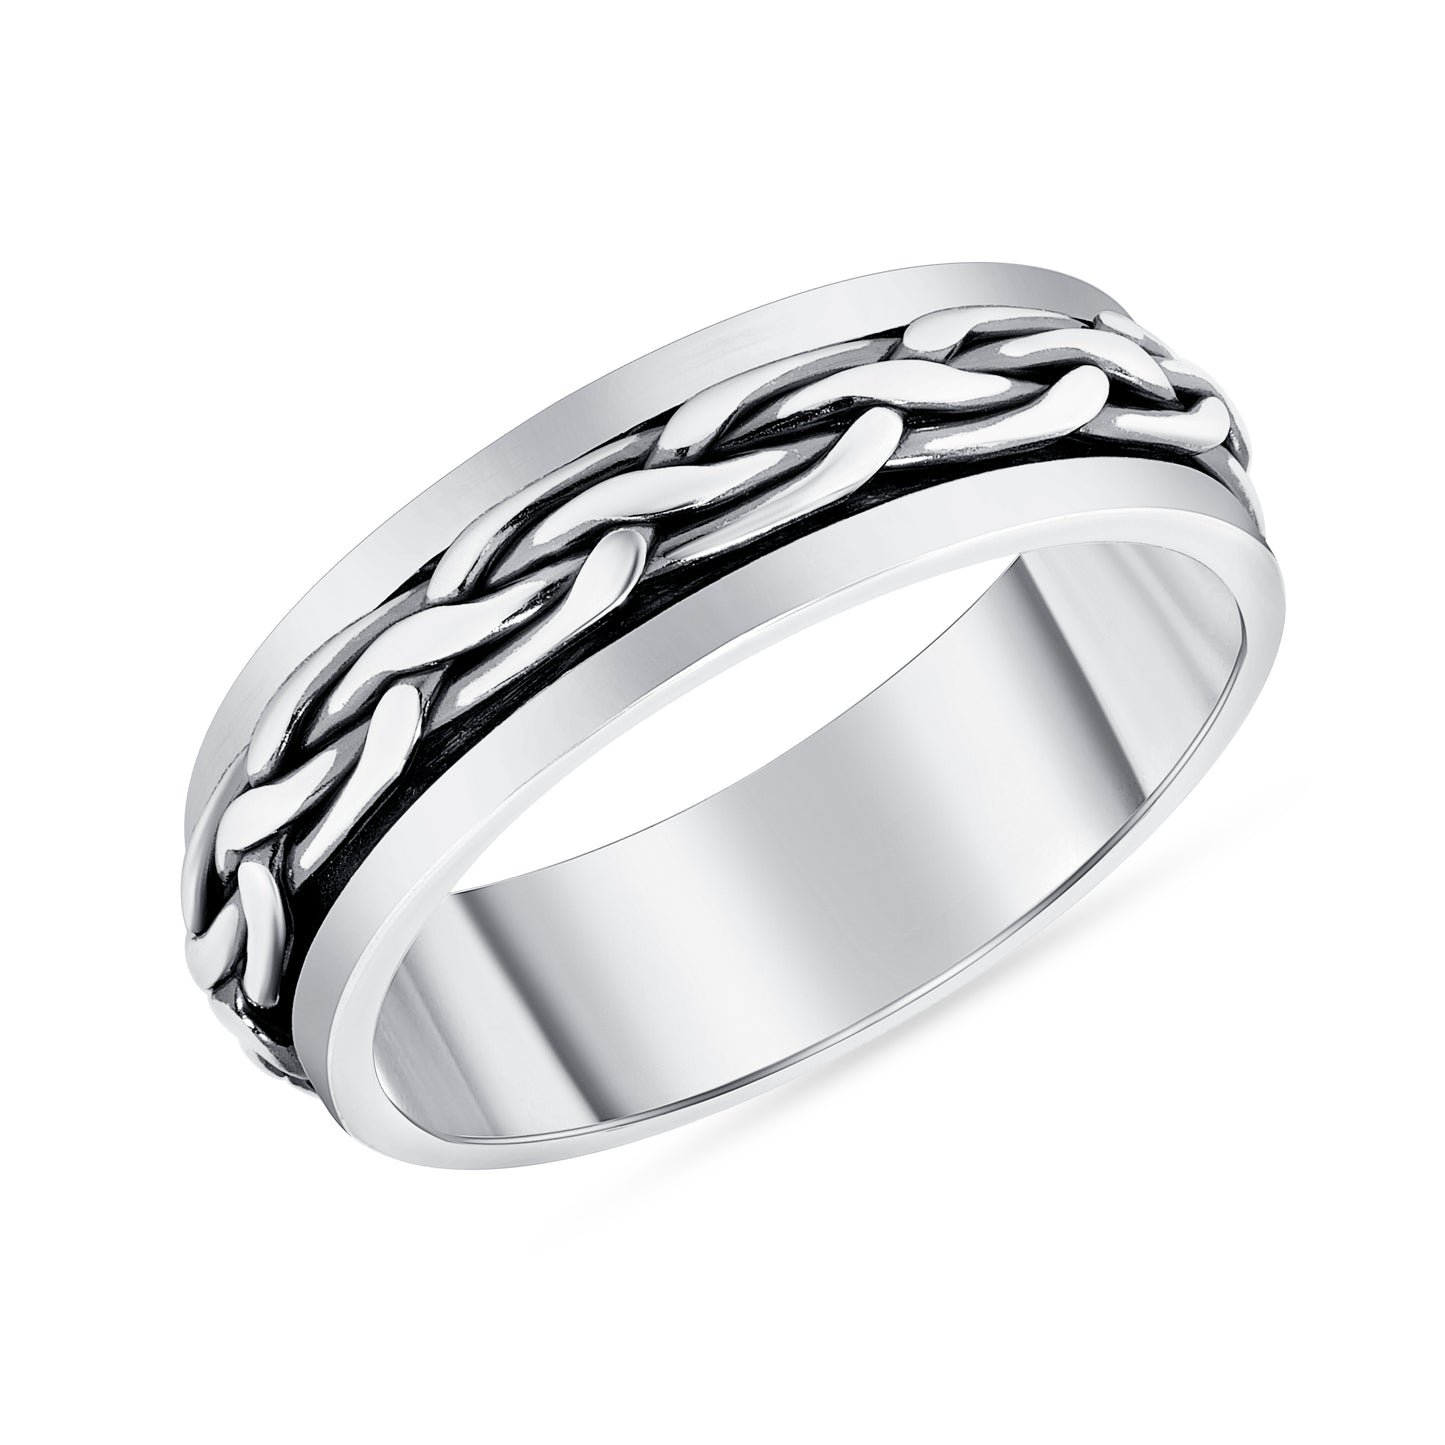 R71010189. Silver 925 Braided Spinning Oxidized Ring